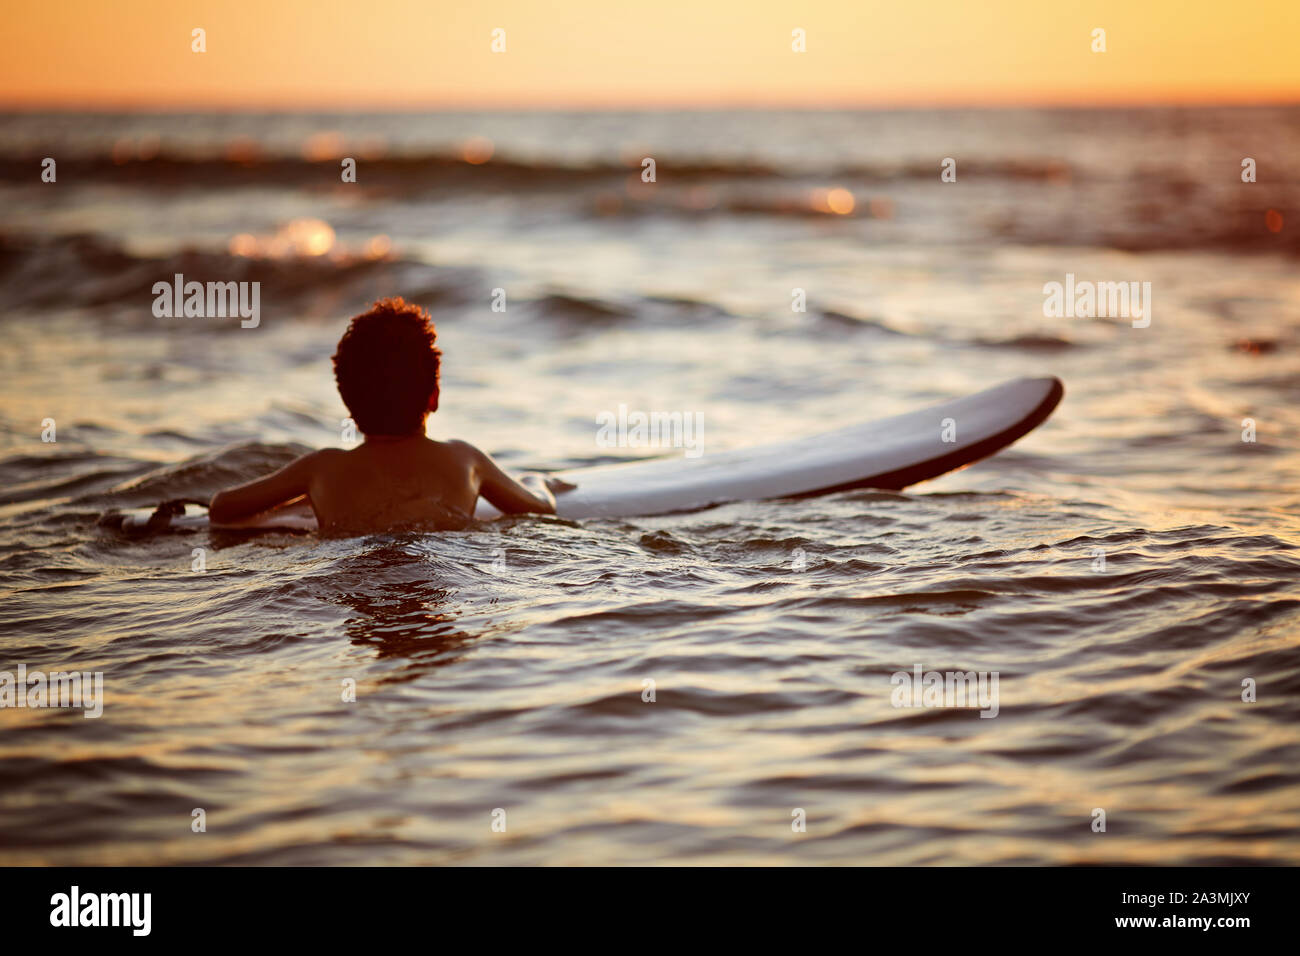 Young Man Riding Wave at Sunset. Outdoor Active Lifestyle. Surfing at Sunset Stock Photo